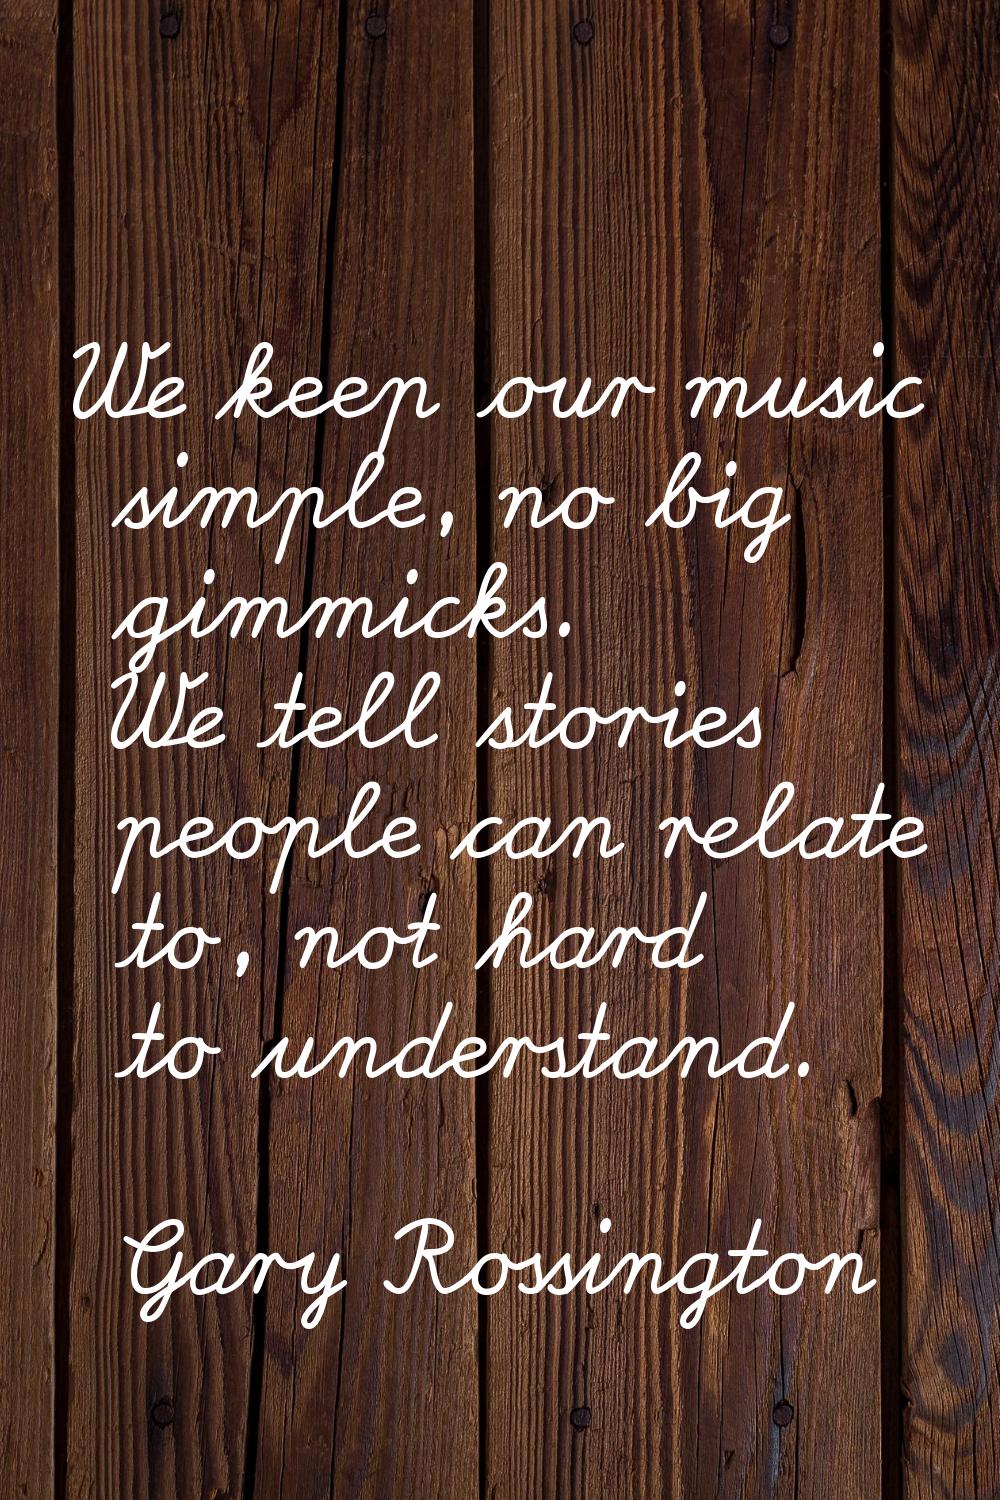 We keep our music simple, no big gimmicks. We tell stories people can relate to, not hard to unders